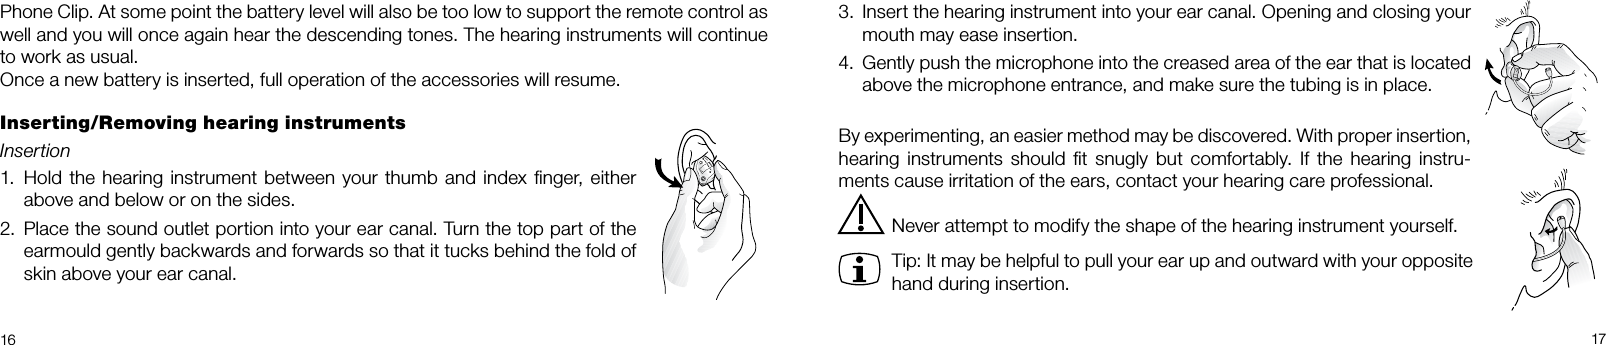  16 173.  Insert the hearing instrument into your ear canal. Opening and closing your mouth may ease insertion.4.  Gently push the microphone into the creased area of the ear that is located above the microphone entrance, and make sure the tubing is in place.By experimenting, an easier method may be discovered. With proper insertion, hearing instruments should  ﬁt snugly  but comfortably. If  the  hearing  instru-ments cause irritation of the ears, contact your hearing care professional. Never attempt to modify the shape of the hearing instrument yourself.Tip: It may be helpful to pull your ear up and outward with your opposite hand during insertion.Phone Clip. At some point the battery level will also be too low to support the remote control as well and you will once again hear the descending tones. The hearing instruments will continue to work as usual.Once a new battery is inserted, full operation of the accessories will resume.Inserting/Removing hearing instrumentsInsertion 1.  Hold the hearing instrument between your thumb and index ﬁnger, either above and below or on the sides.2.  Place the sound outlet portion into your ear canal. Turn the top part of the earmould gently backwards and forwards so that it tucks behind the fold of skin above your ear canal.